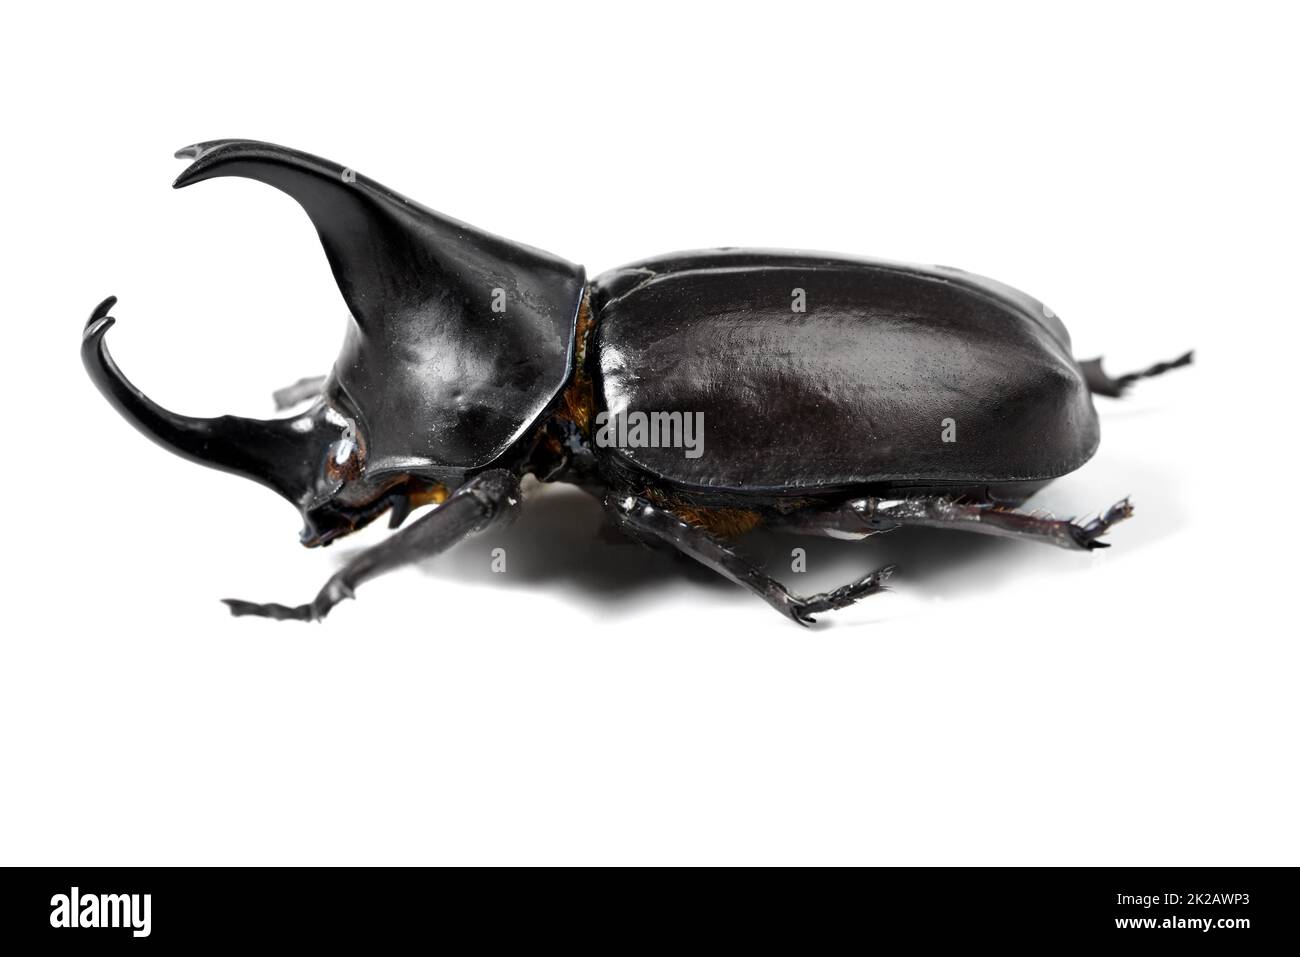 The toughest beetle around. Closeup side view of a rhinoceros beetle. Stock Photo